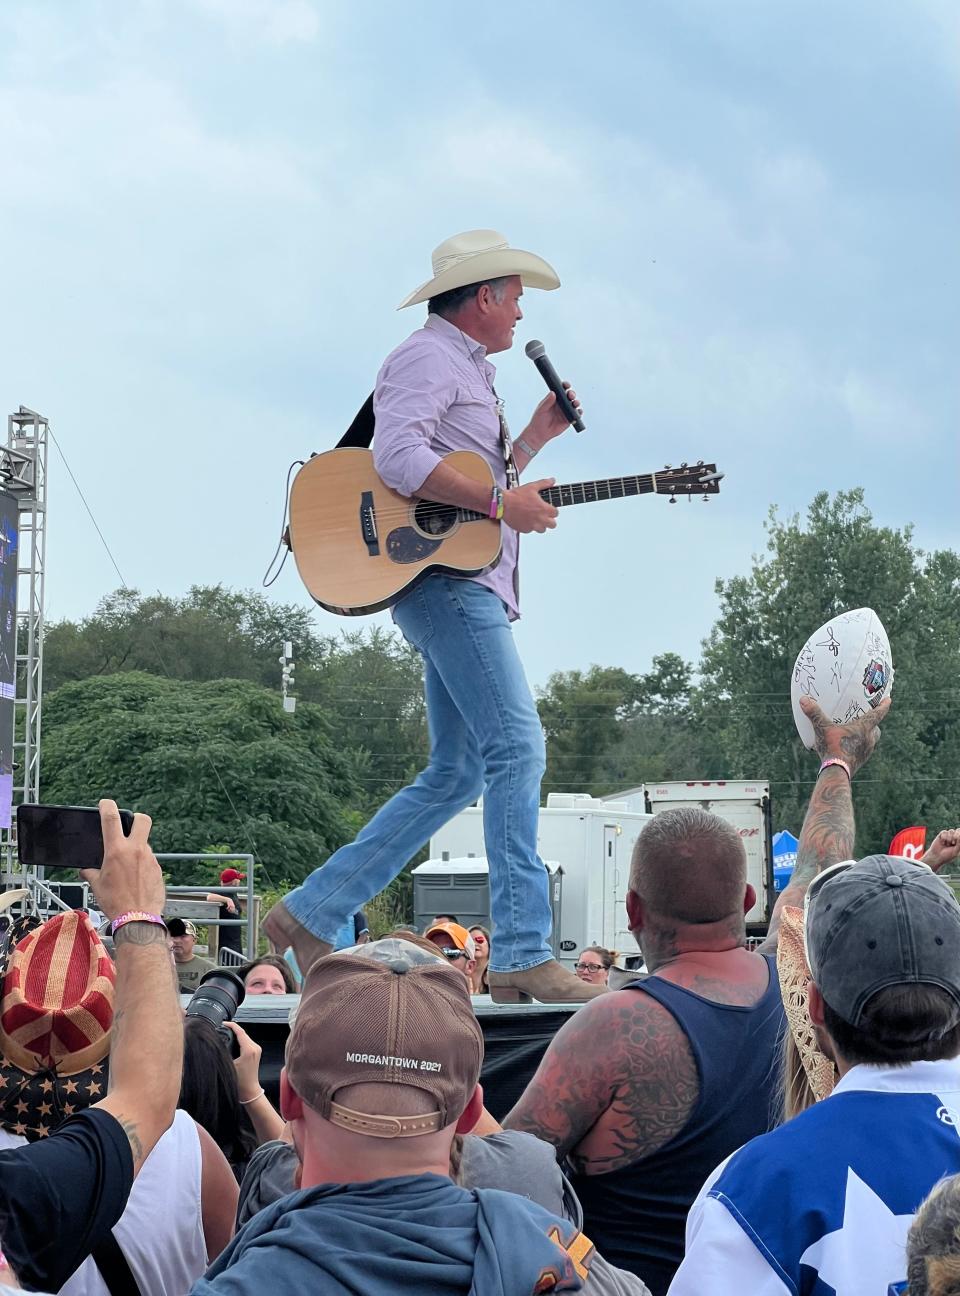 Tracy Byrd performs Friday during Neon Nights, a country music festival at Clay's Resort Jellystone Park amphitheater. Concerts continue Saturday with John Michael Montgomery, Tim McGraw and other artists.